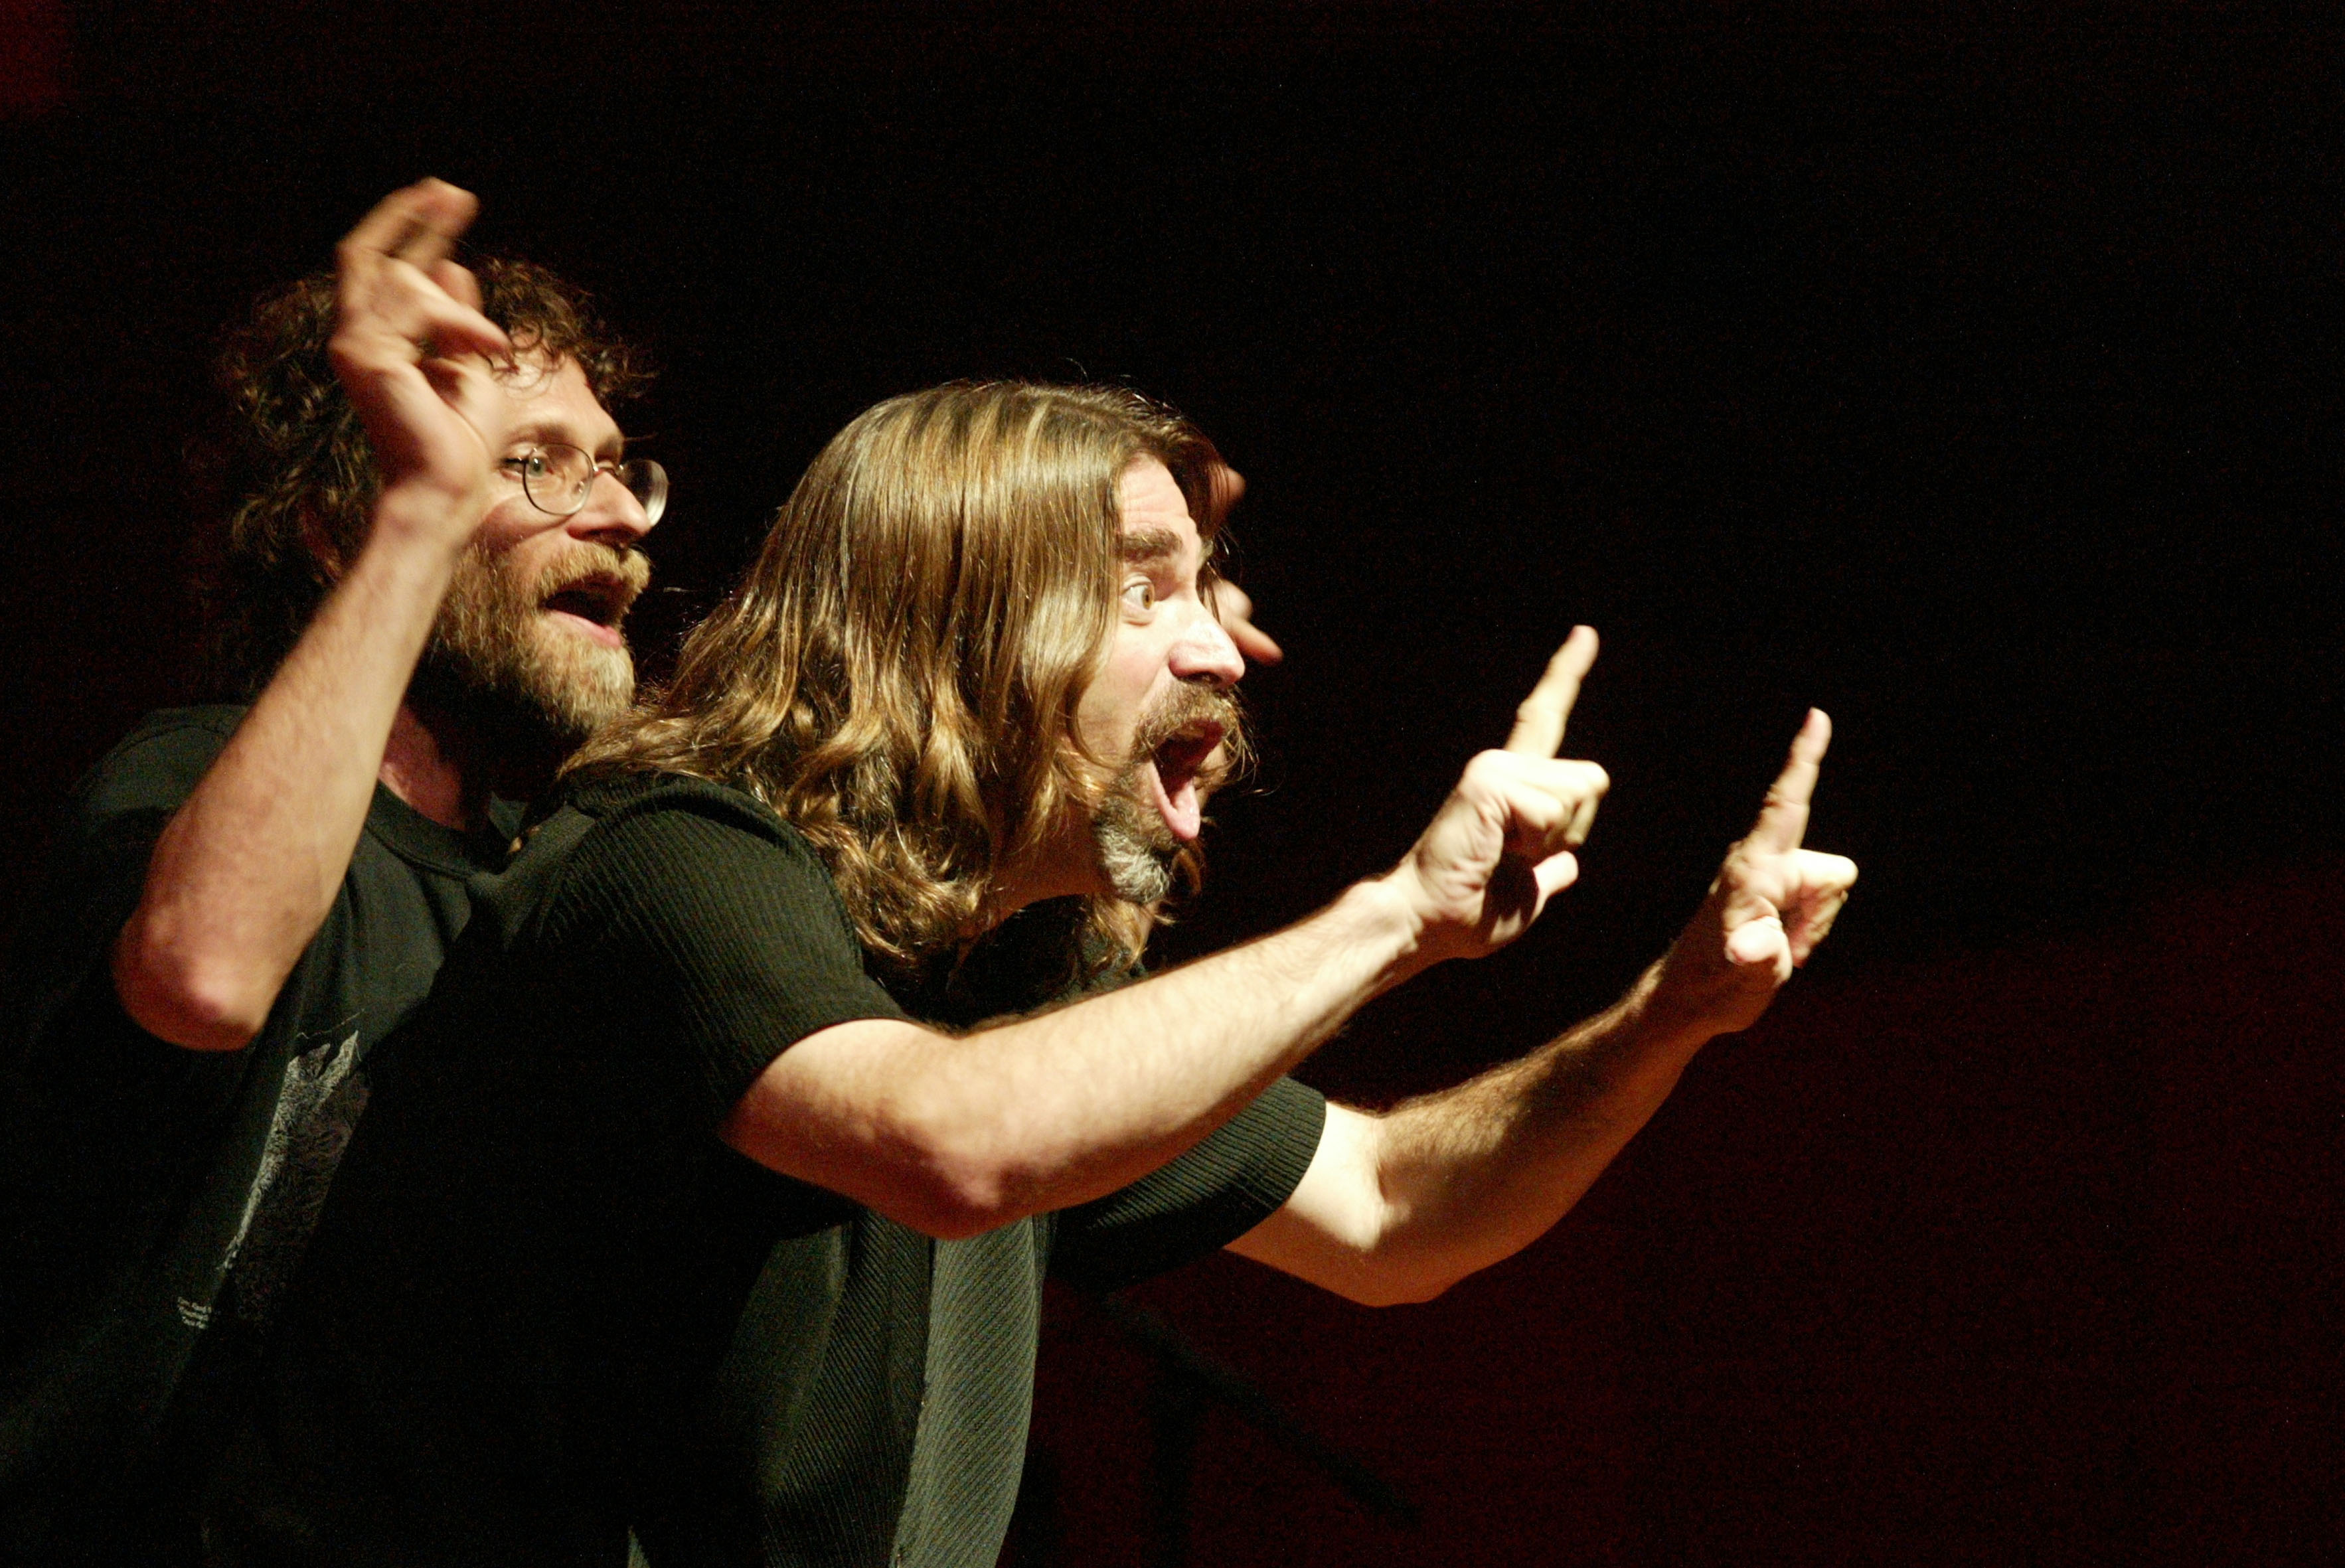 Two men on stage speaking while making hand gestures to the crowd